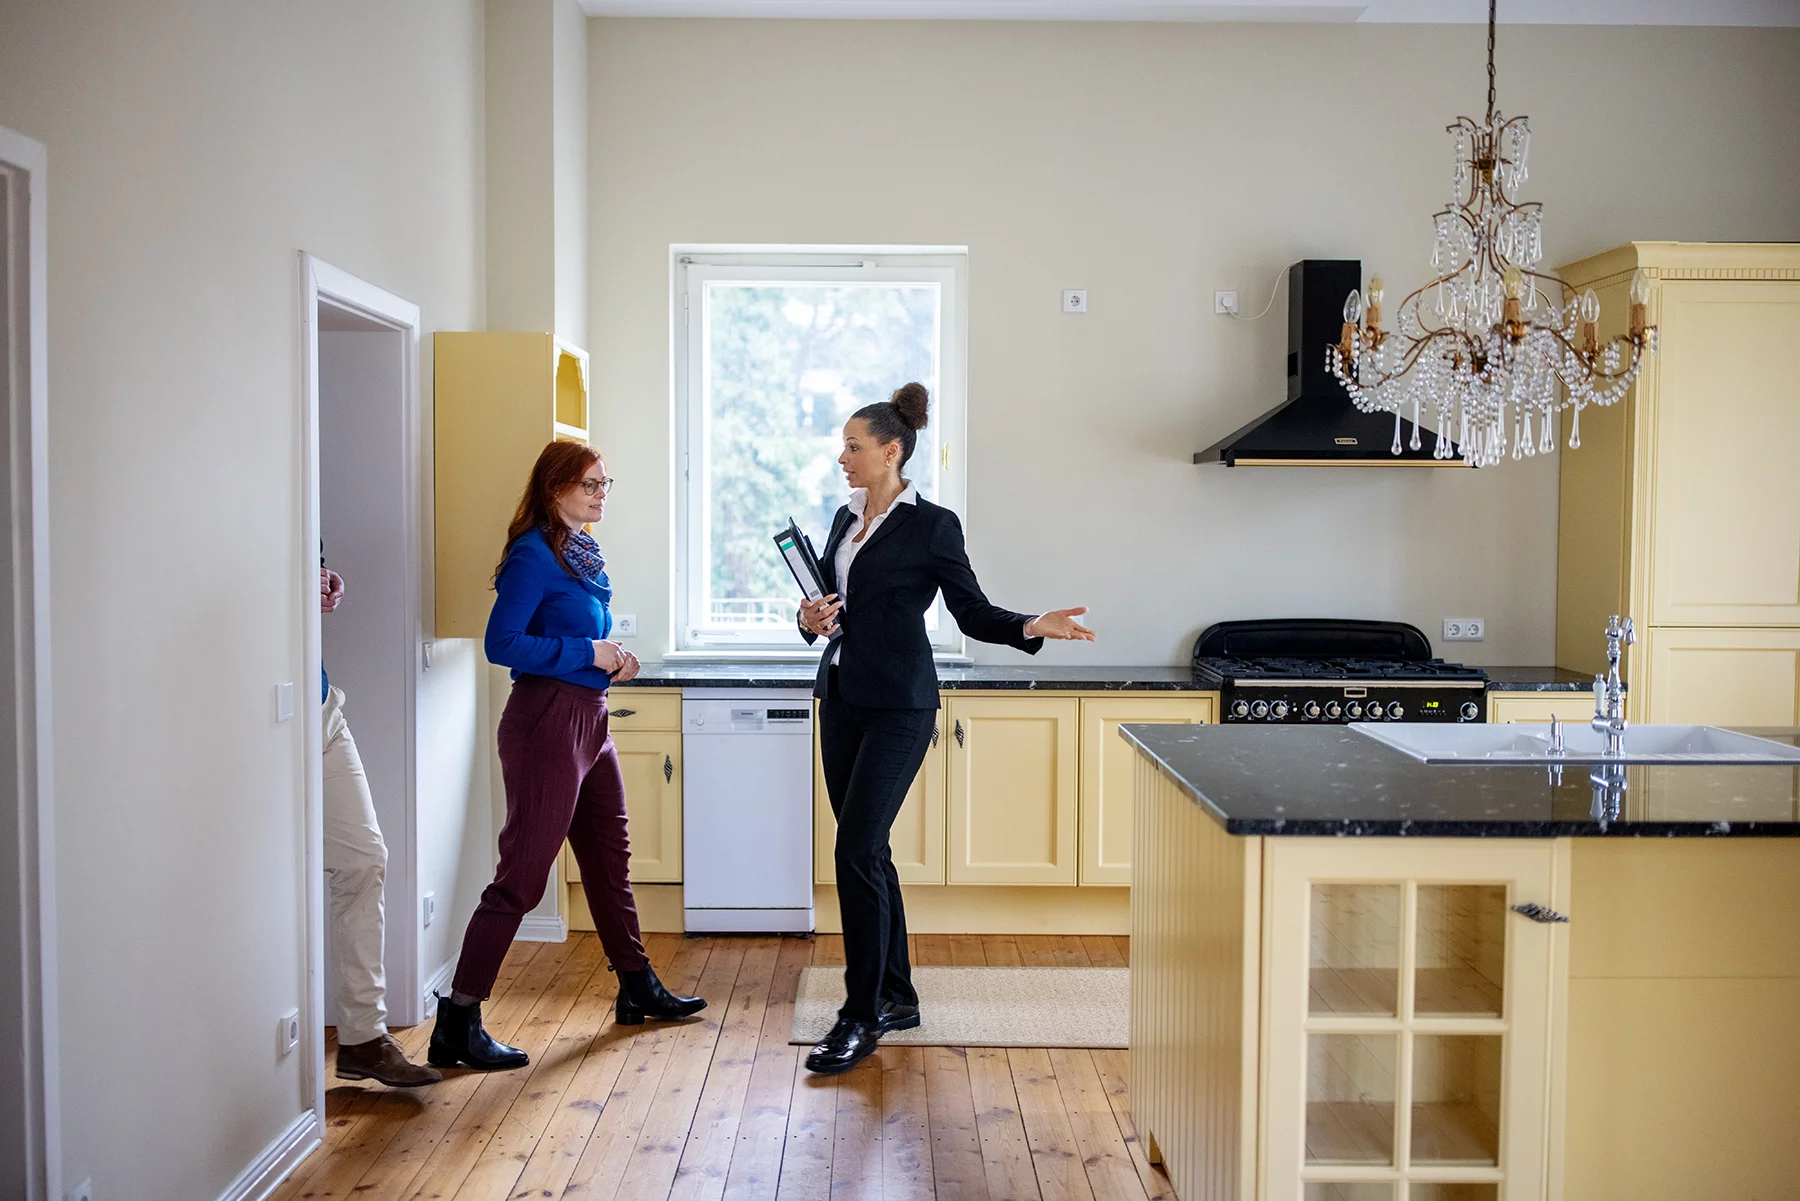 An estate agent shows a couple around a white and yellow kitchen